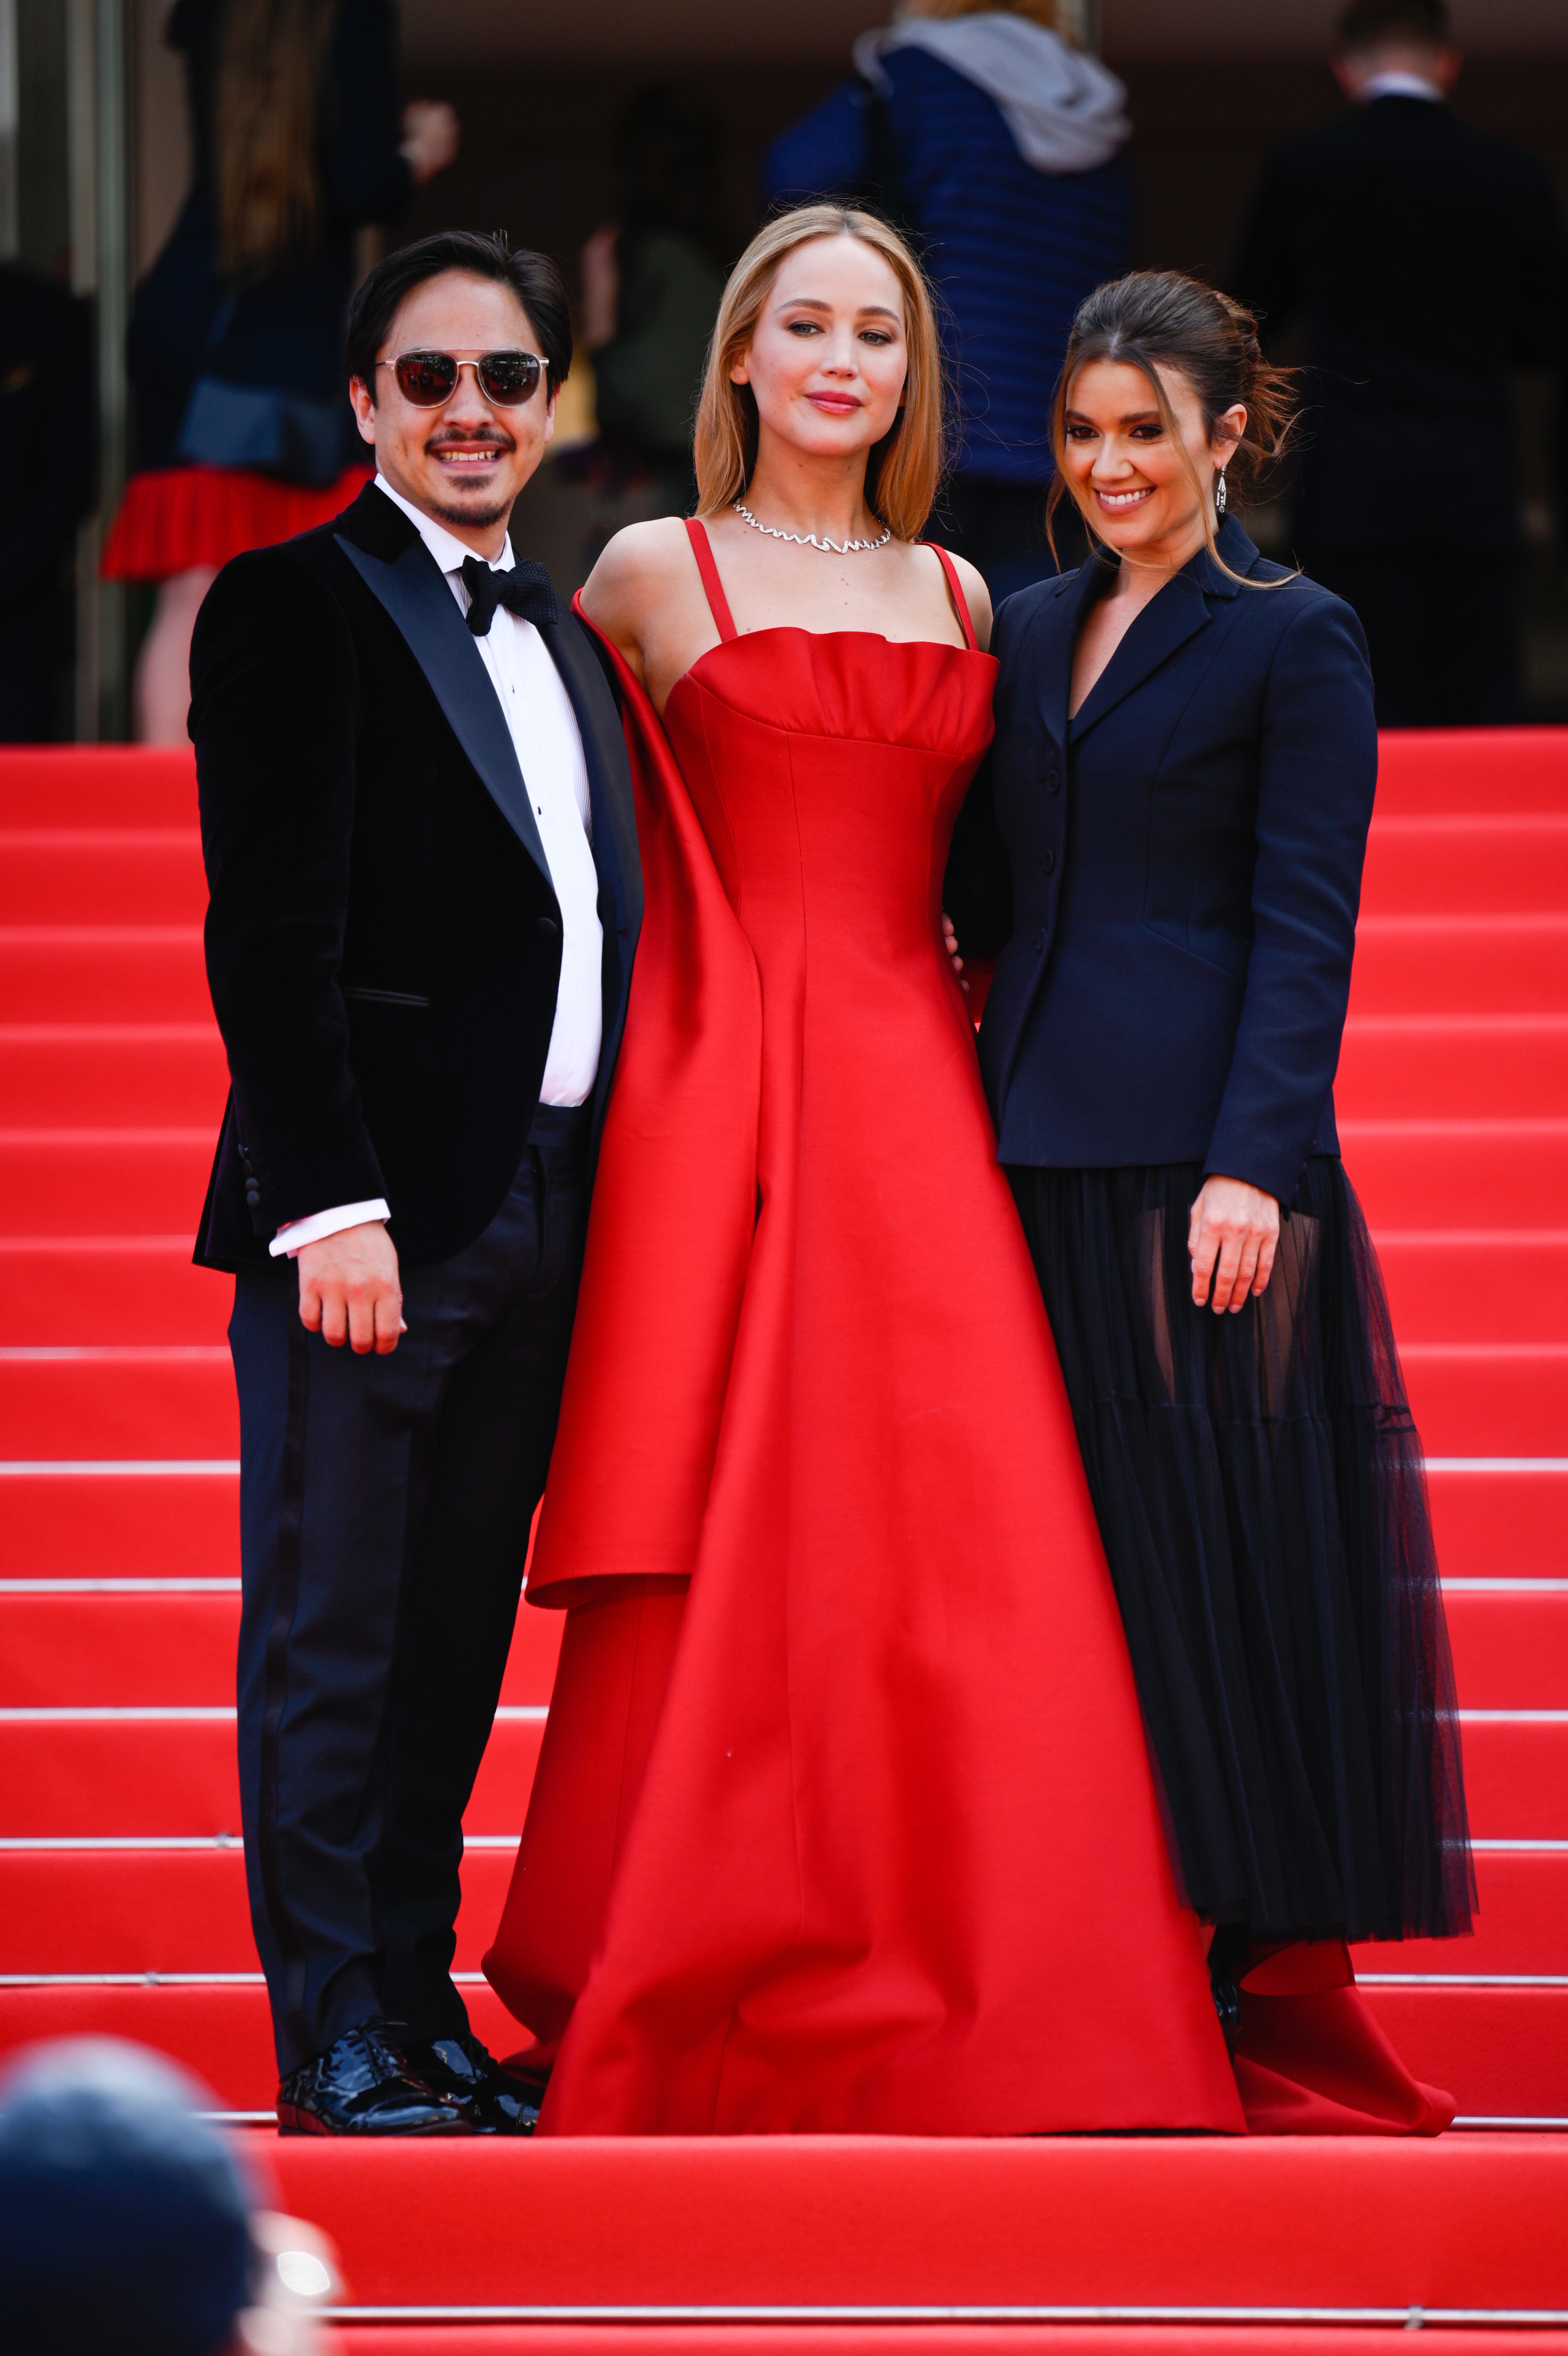 JLaw on the red carpet with Justine Ciarrocchi, a producer of Bread and Roses, and another person